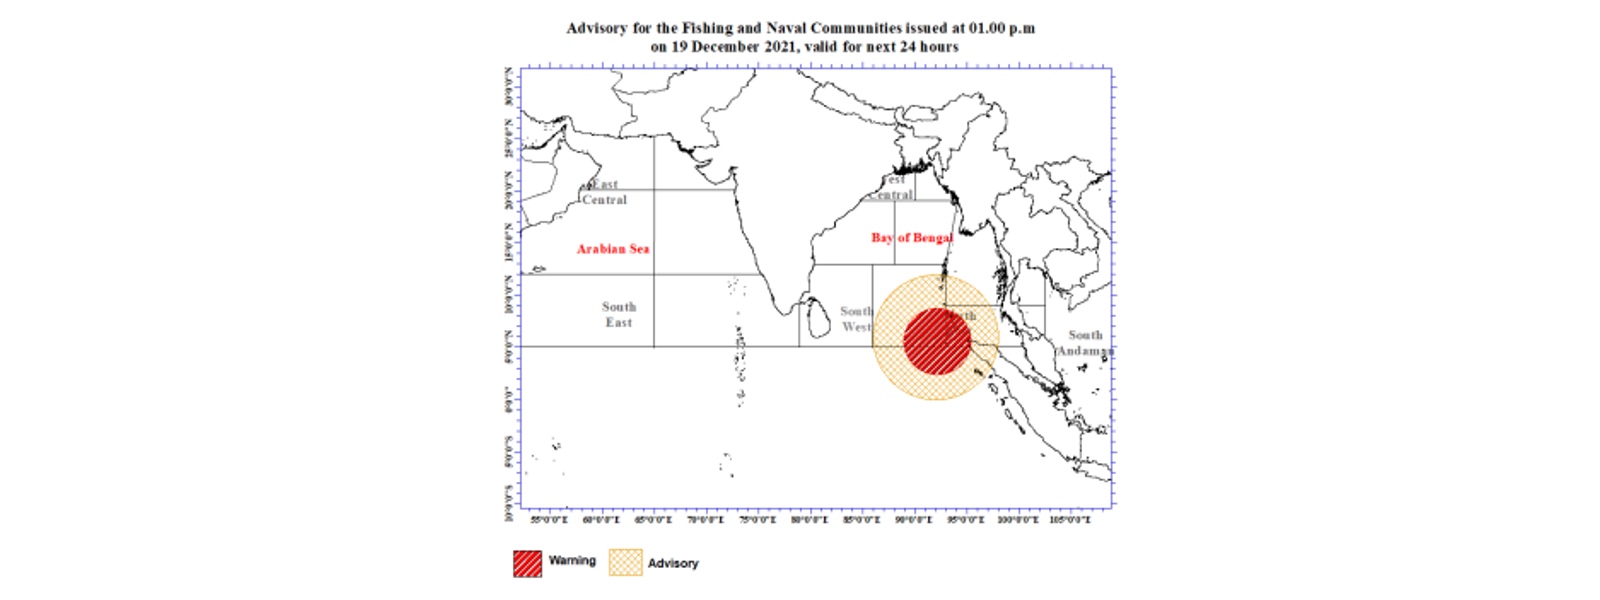 Amber alert over low pressure area in Bay of Bengal issued